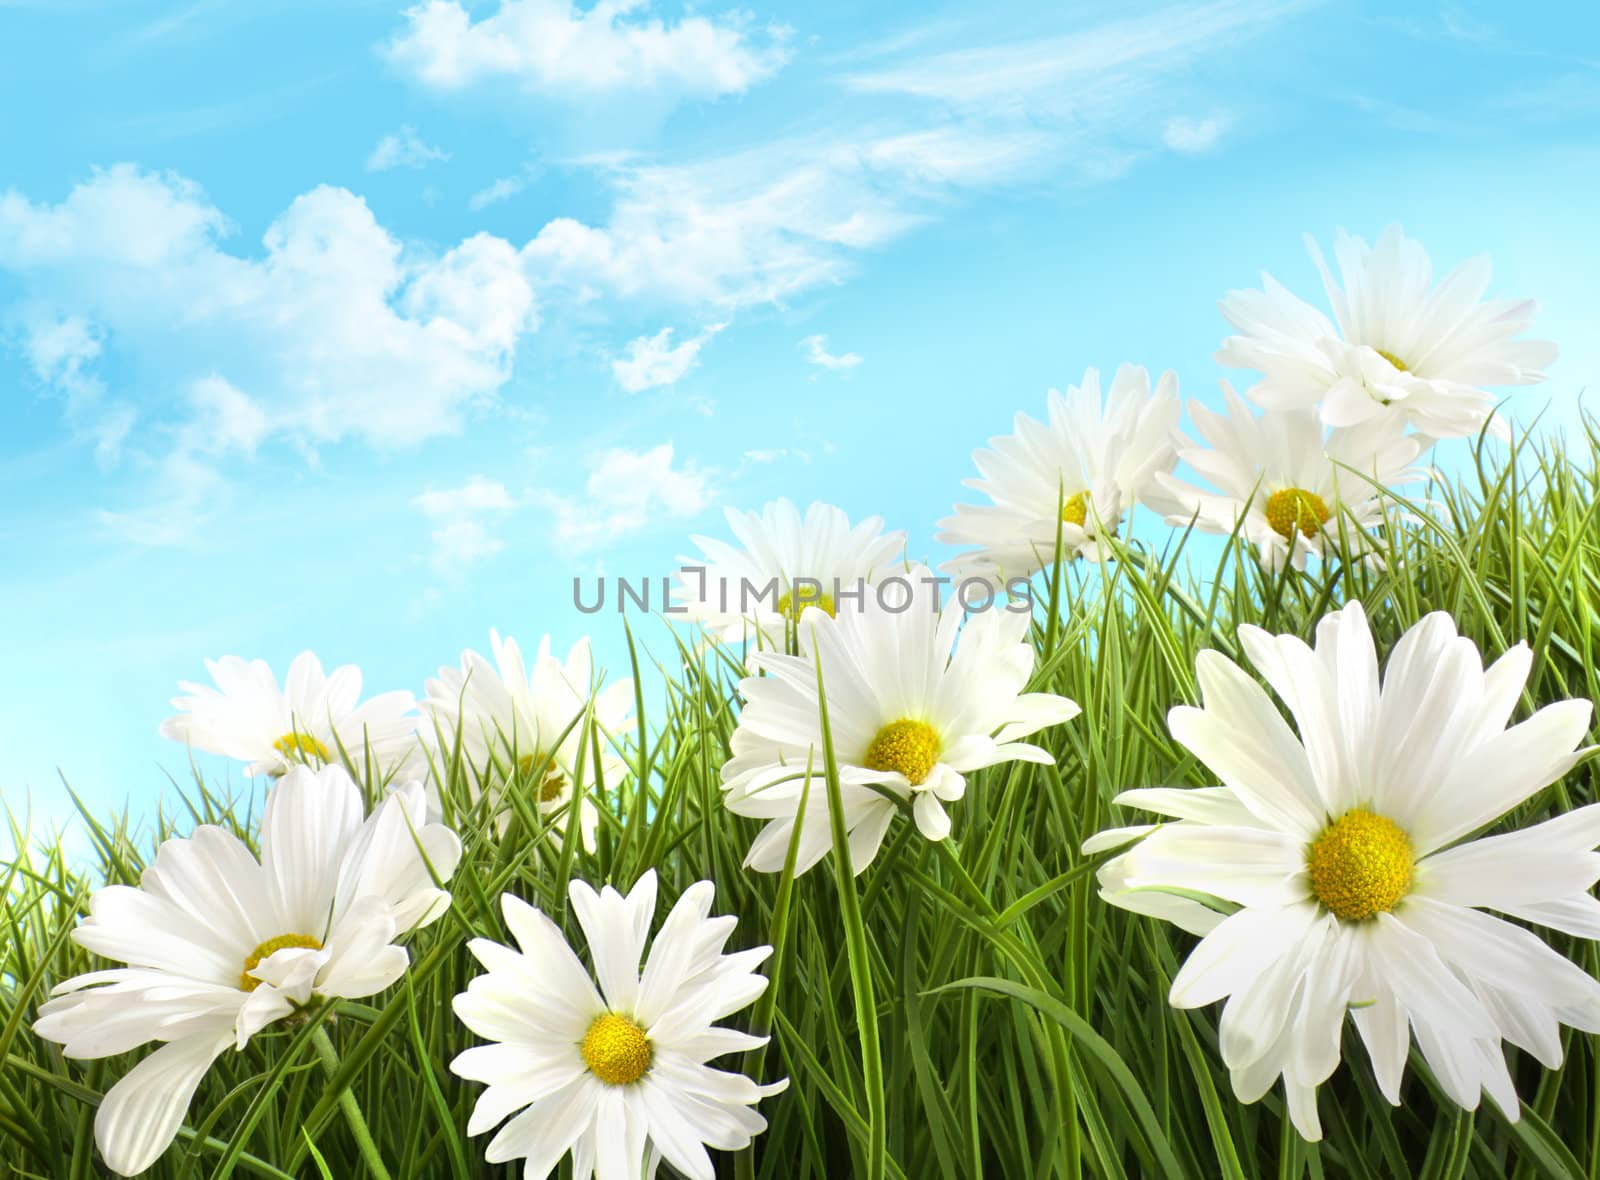 White summer daisies in tall grass with blue sky